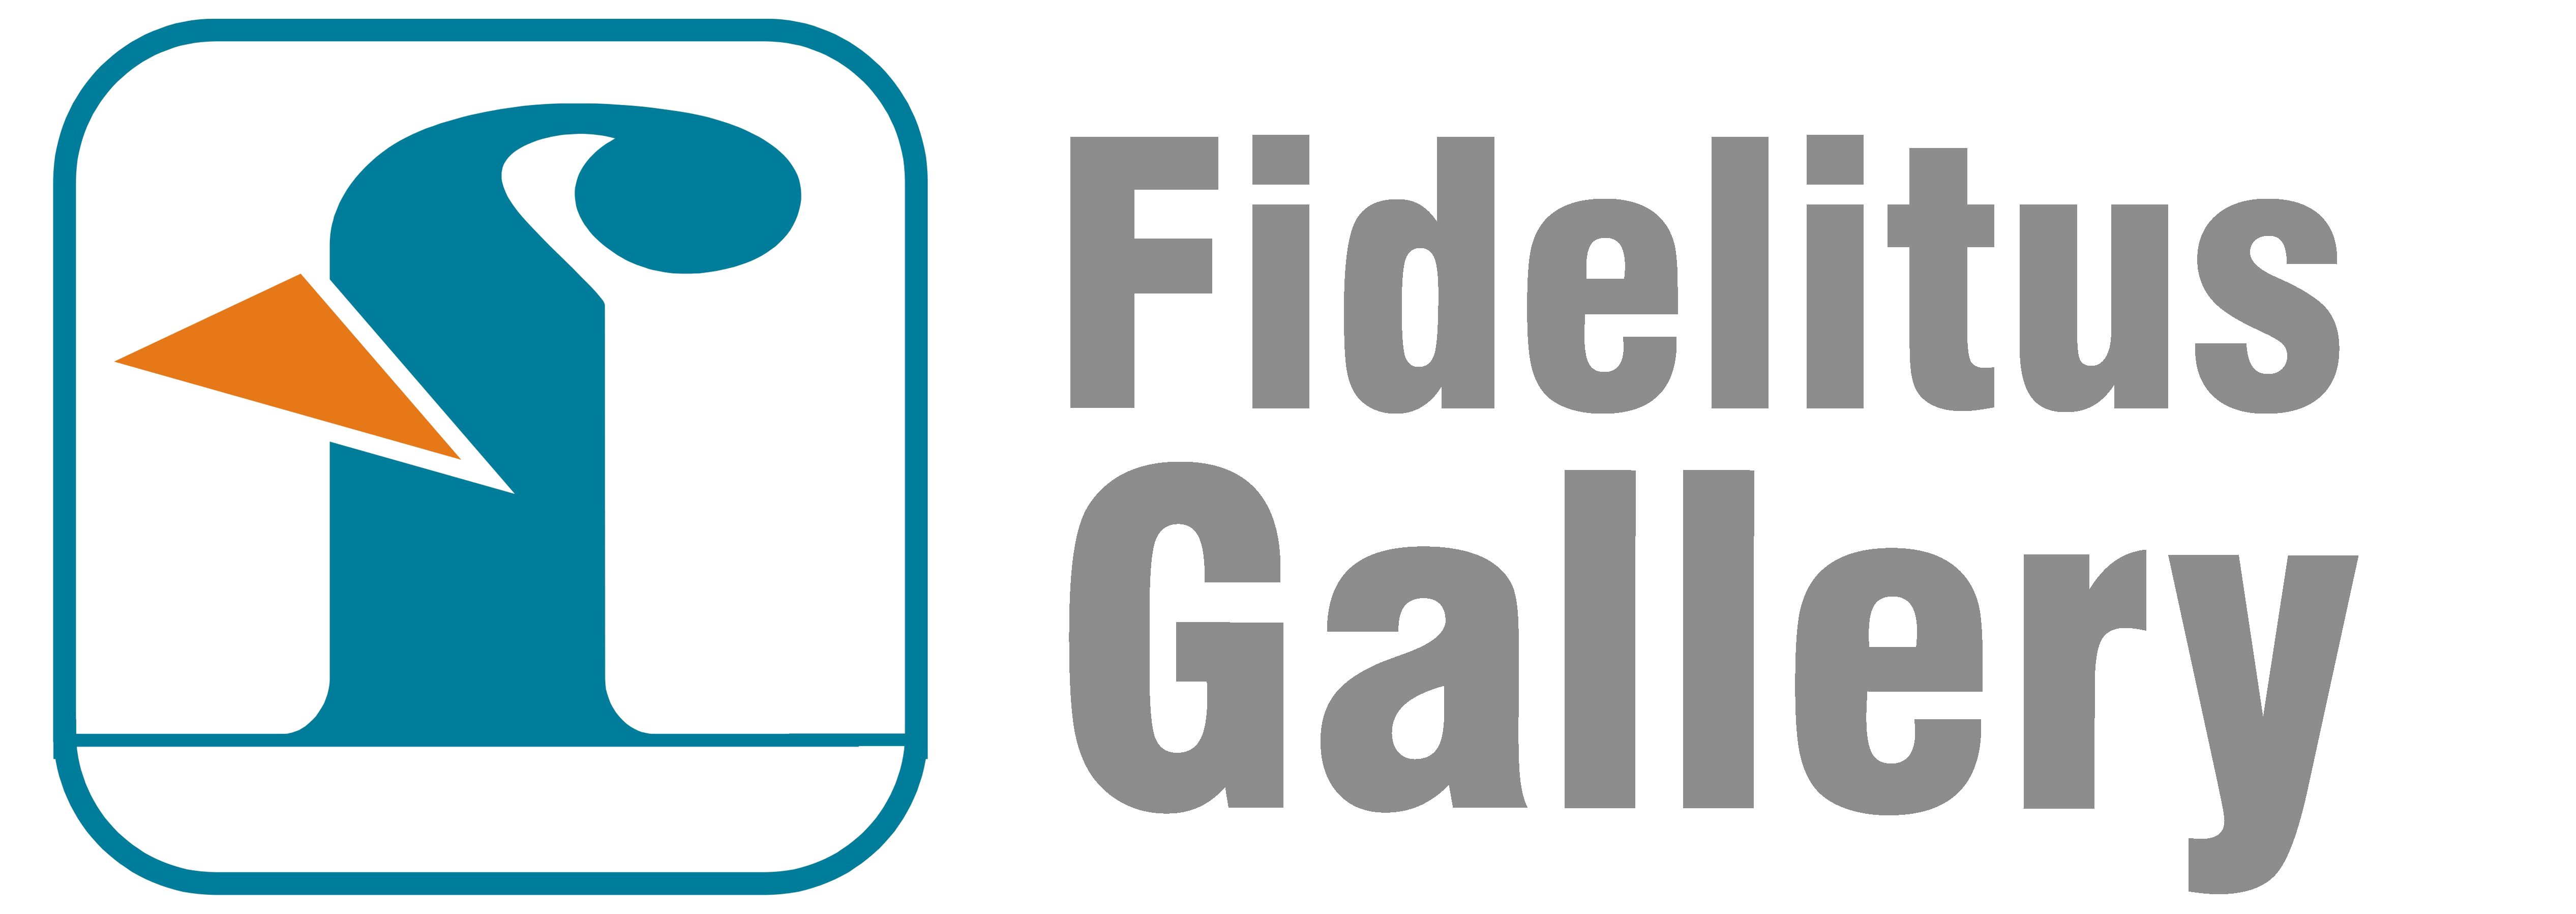 GALLERY LOGO FOR WEB Updated